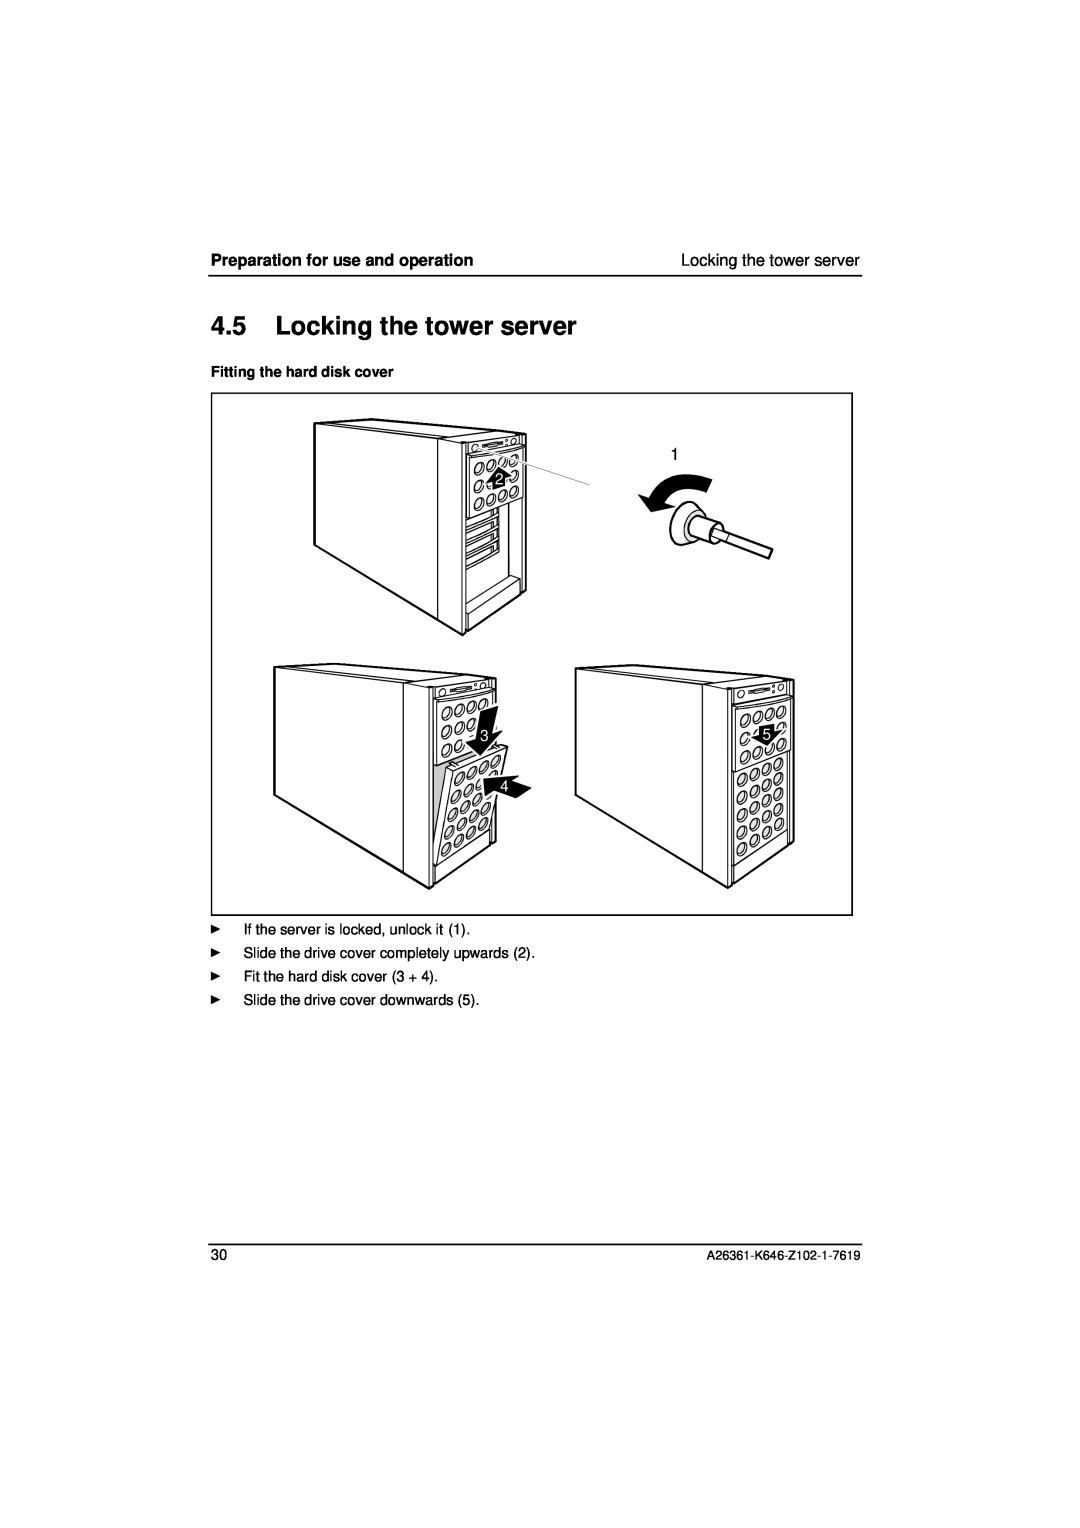 Fujitsu B120 manual Locking the tower server, Fitting the hard disk cover, Preparation for use and operation 